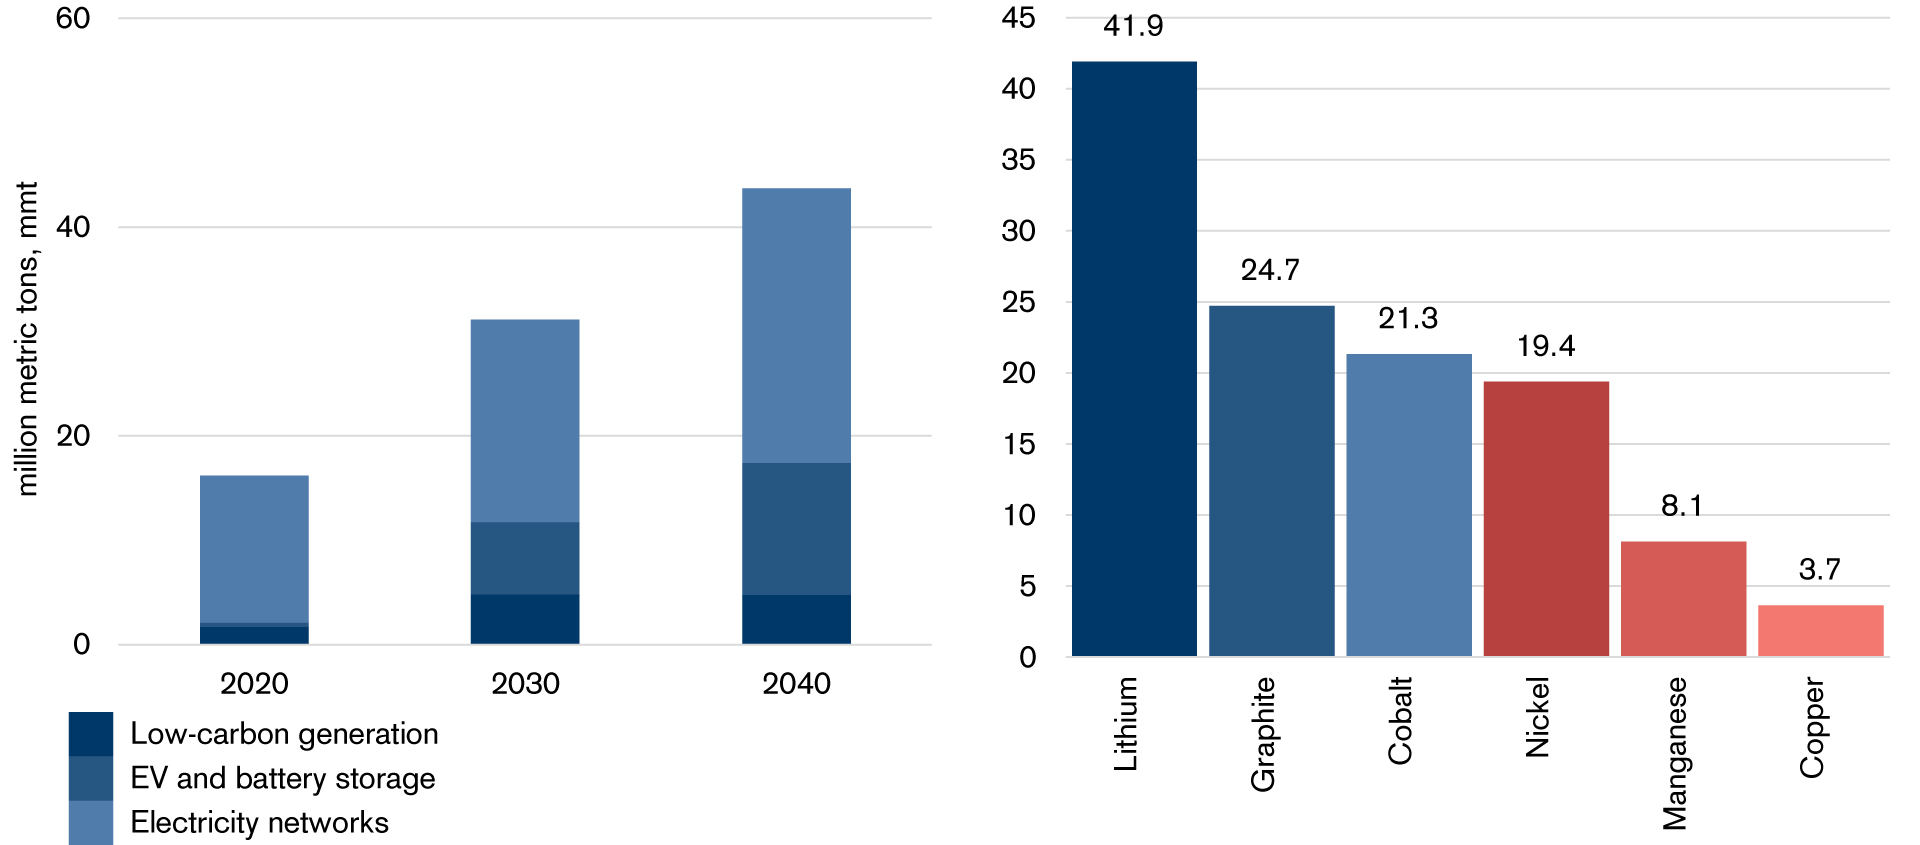 Figure1: Growth in demand for selected minerals in the IEA Sustainable Development Scenario (SDS), 2040 relative to 2020. LHS absolute (Mt), RHS indexed to 2020 = 1; mmt = million metric tons. Source: IEA.